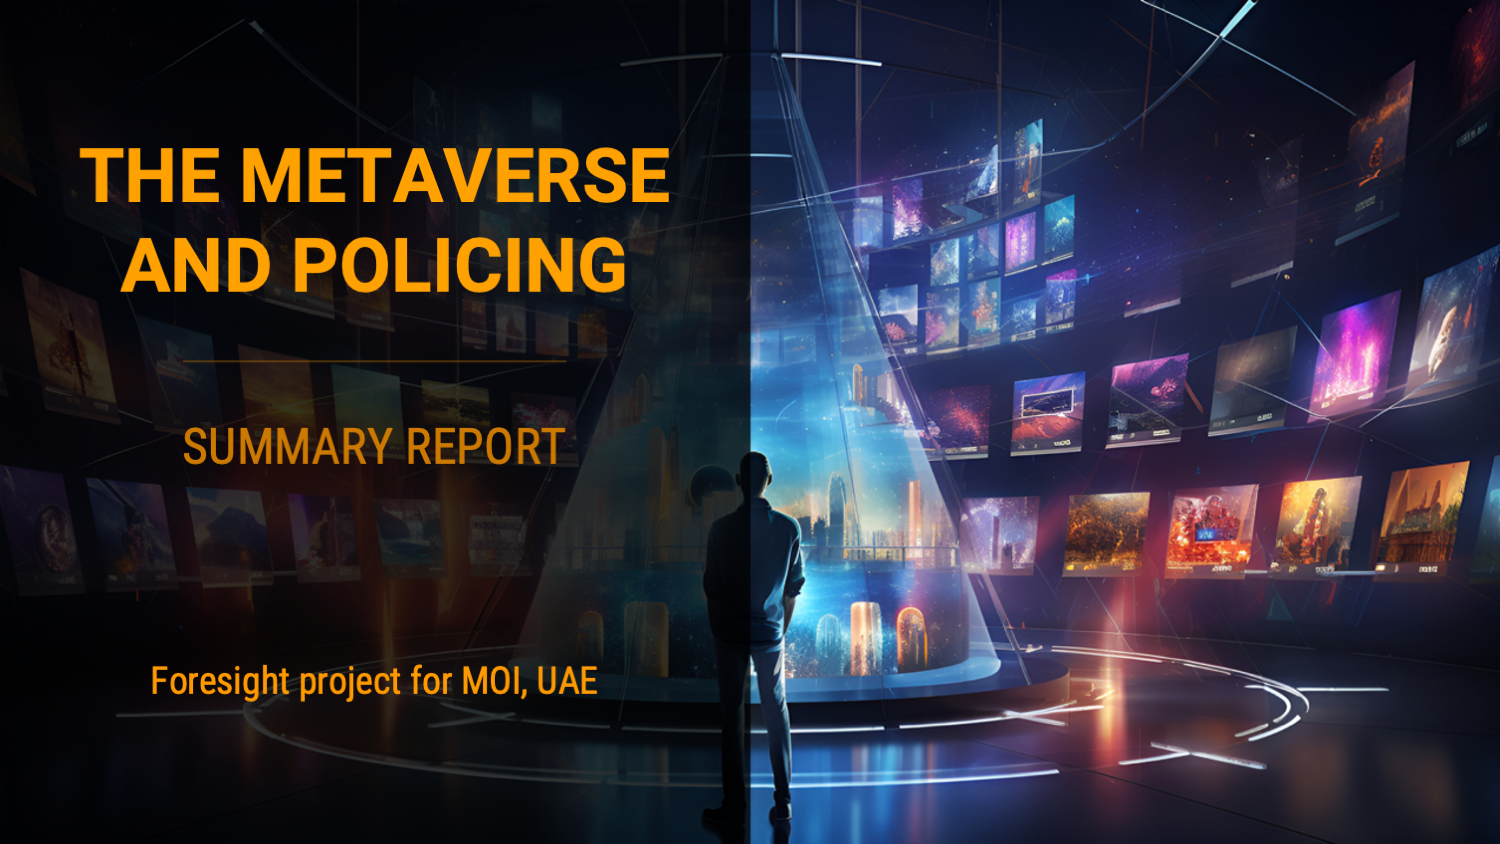 Metaverse project for MOI UAE